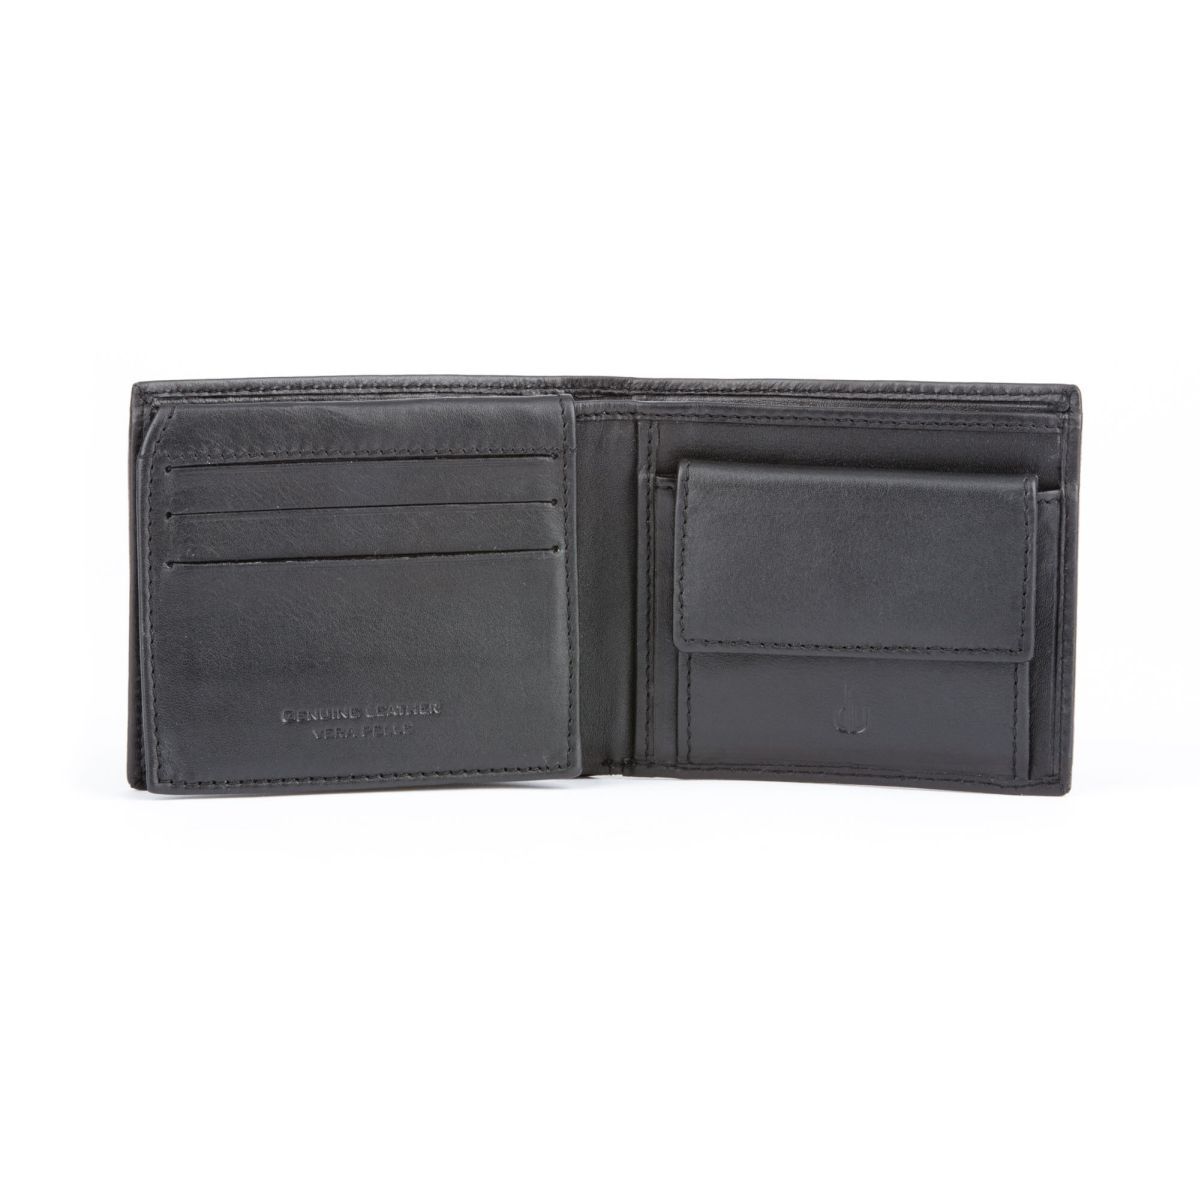 dv Compact Leather Wallet With Coin Pocket - Black